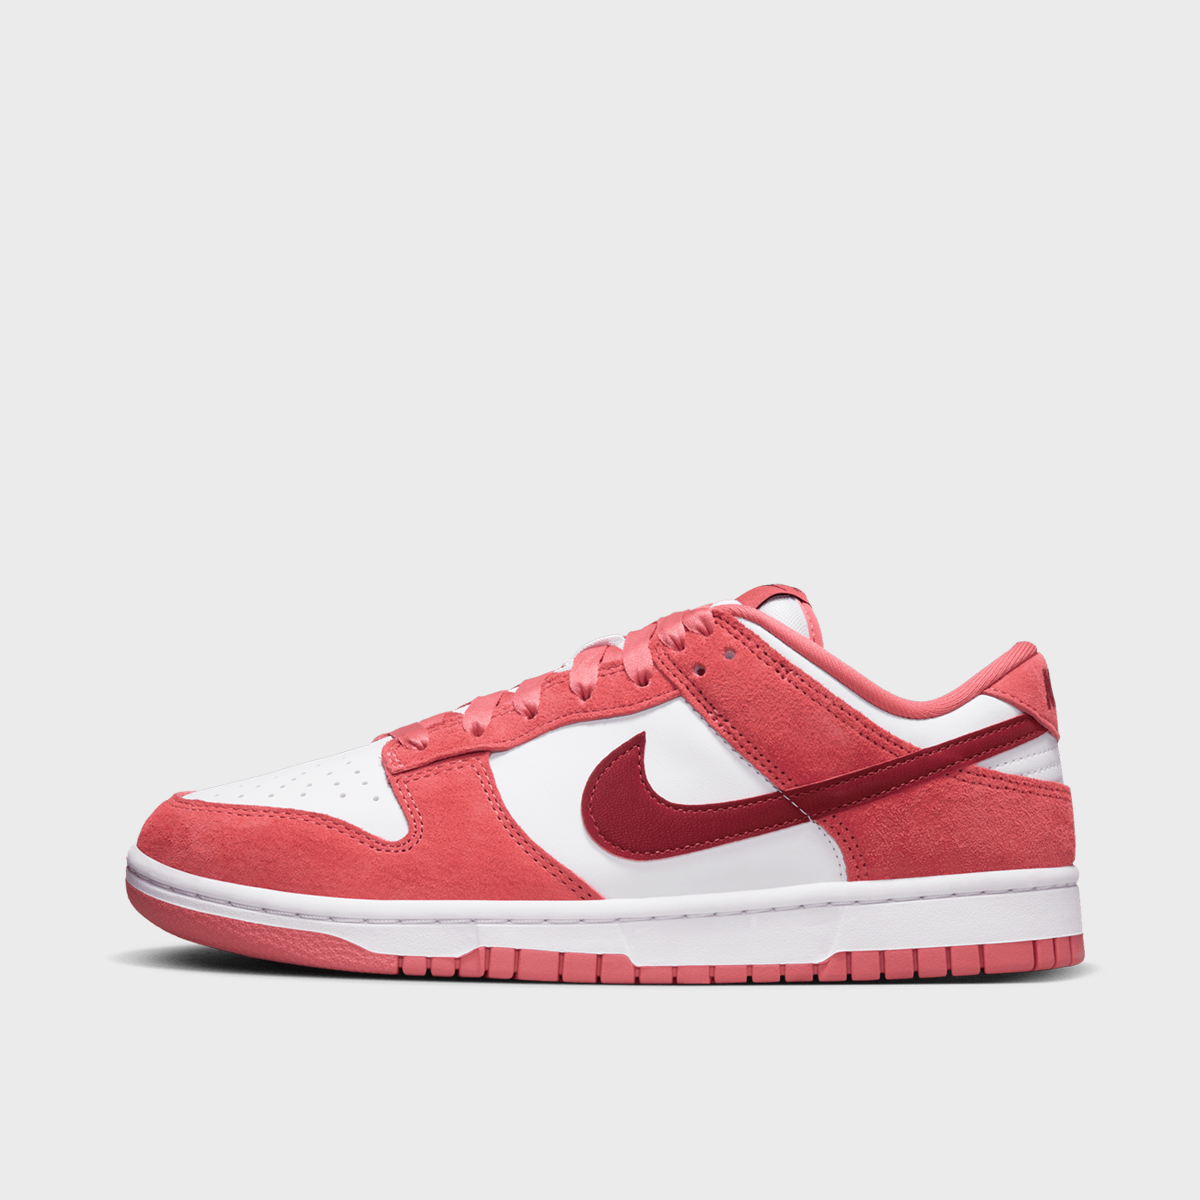 WMNS Dunk Low, NIKE, Footwear, white/team red/adobe/dragon red, taille: 36